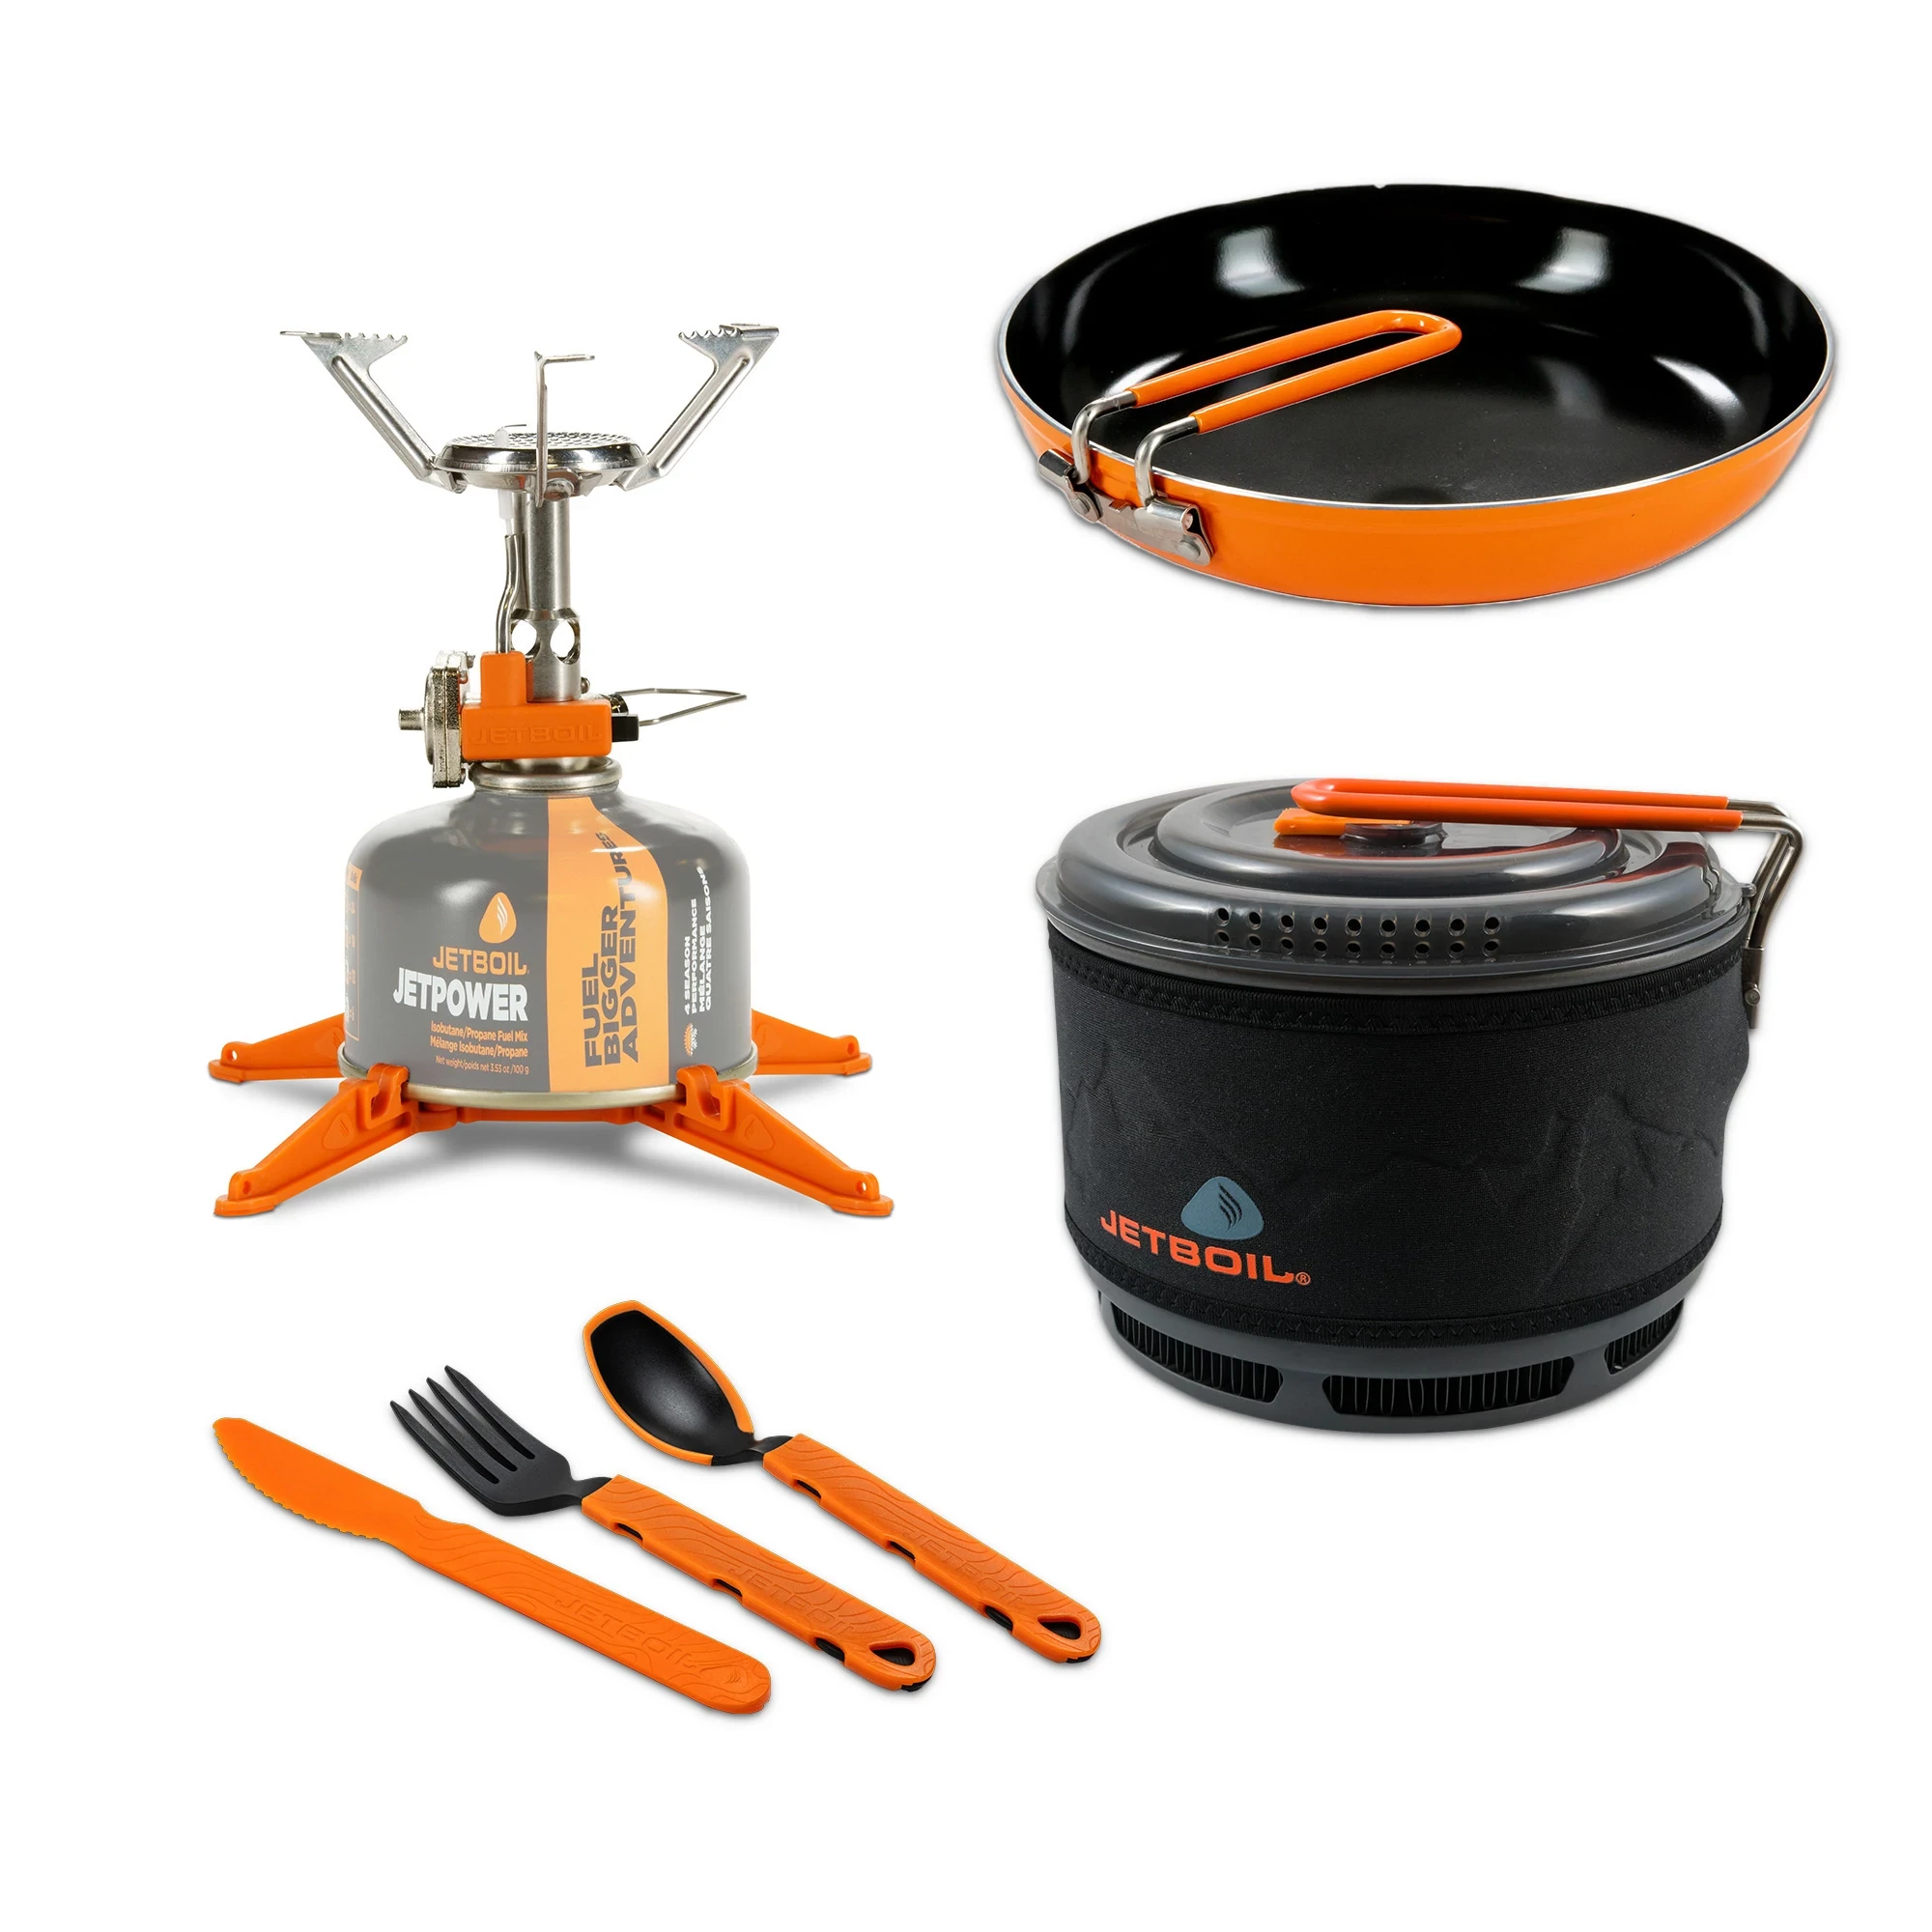 MightyMo Group Cook Bundle included MightyMo, Summit Skillet, 1.5 Ceramic Cook Pot, and TrailWare